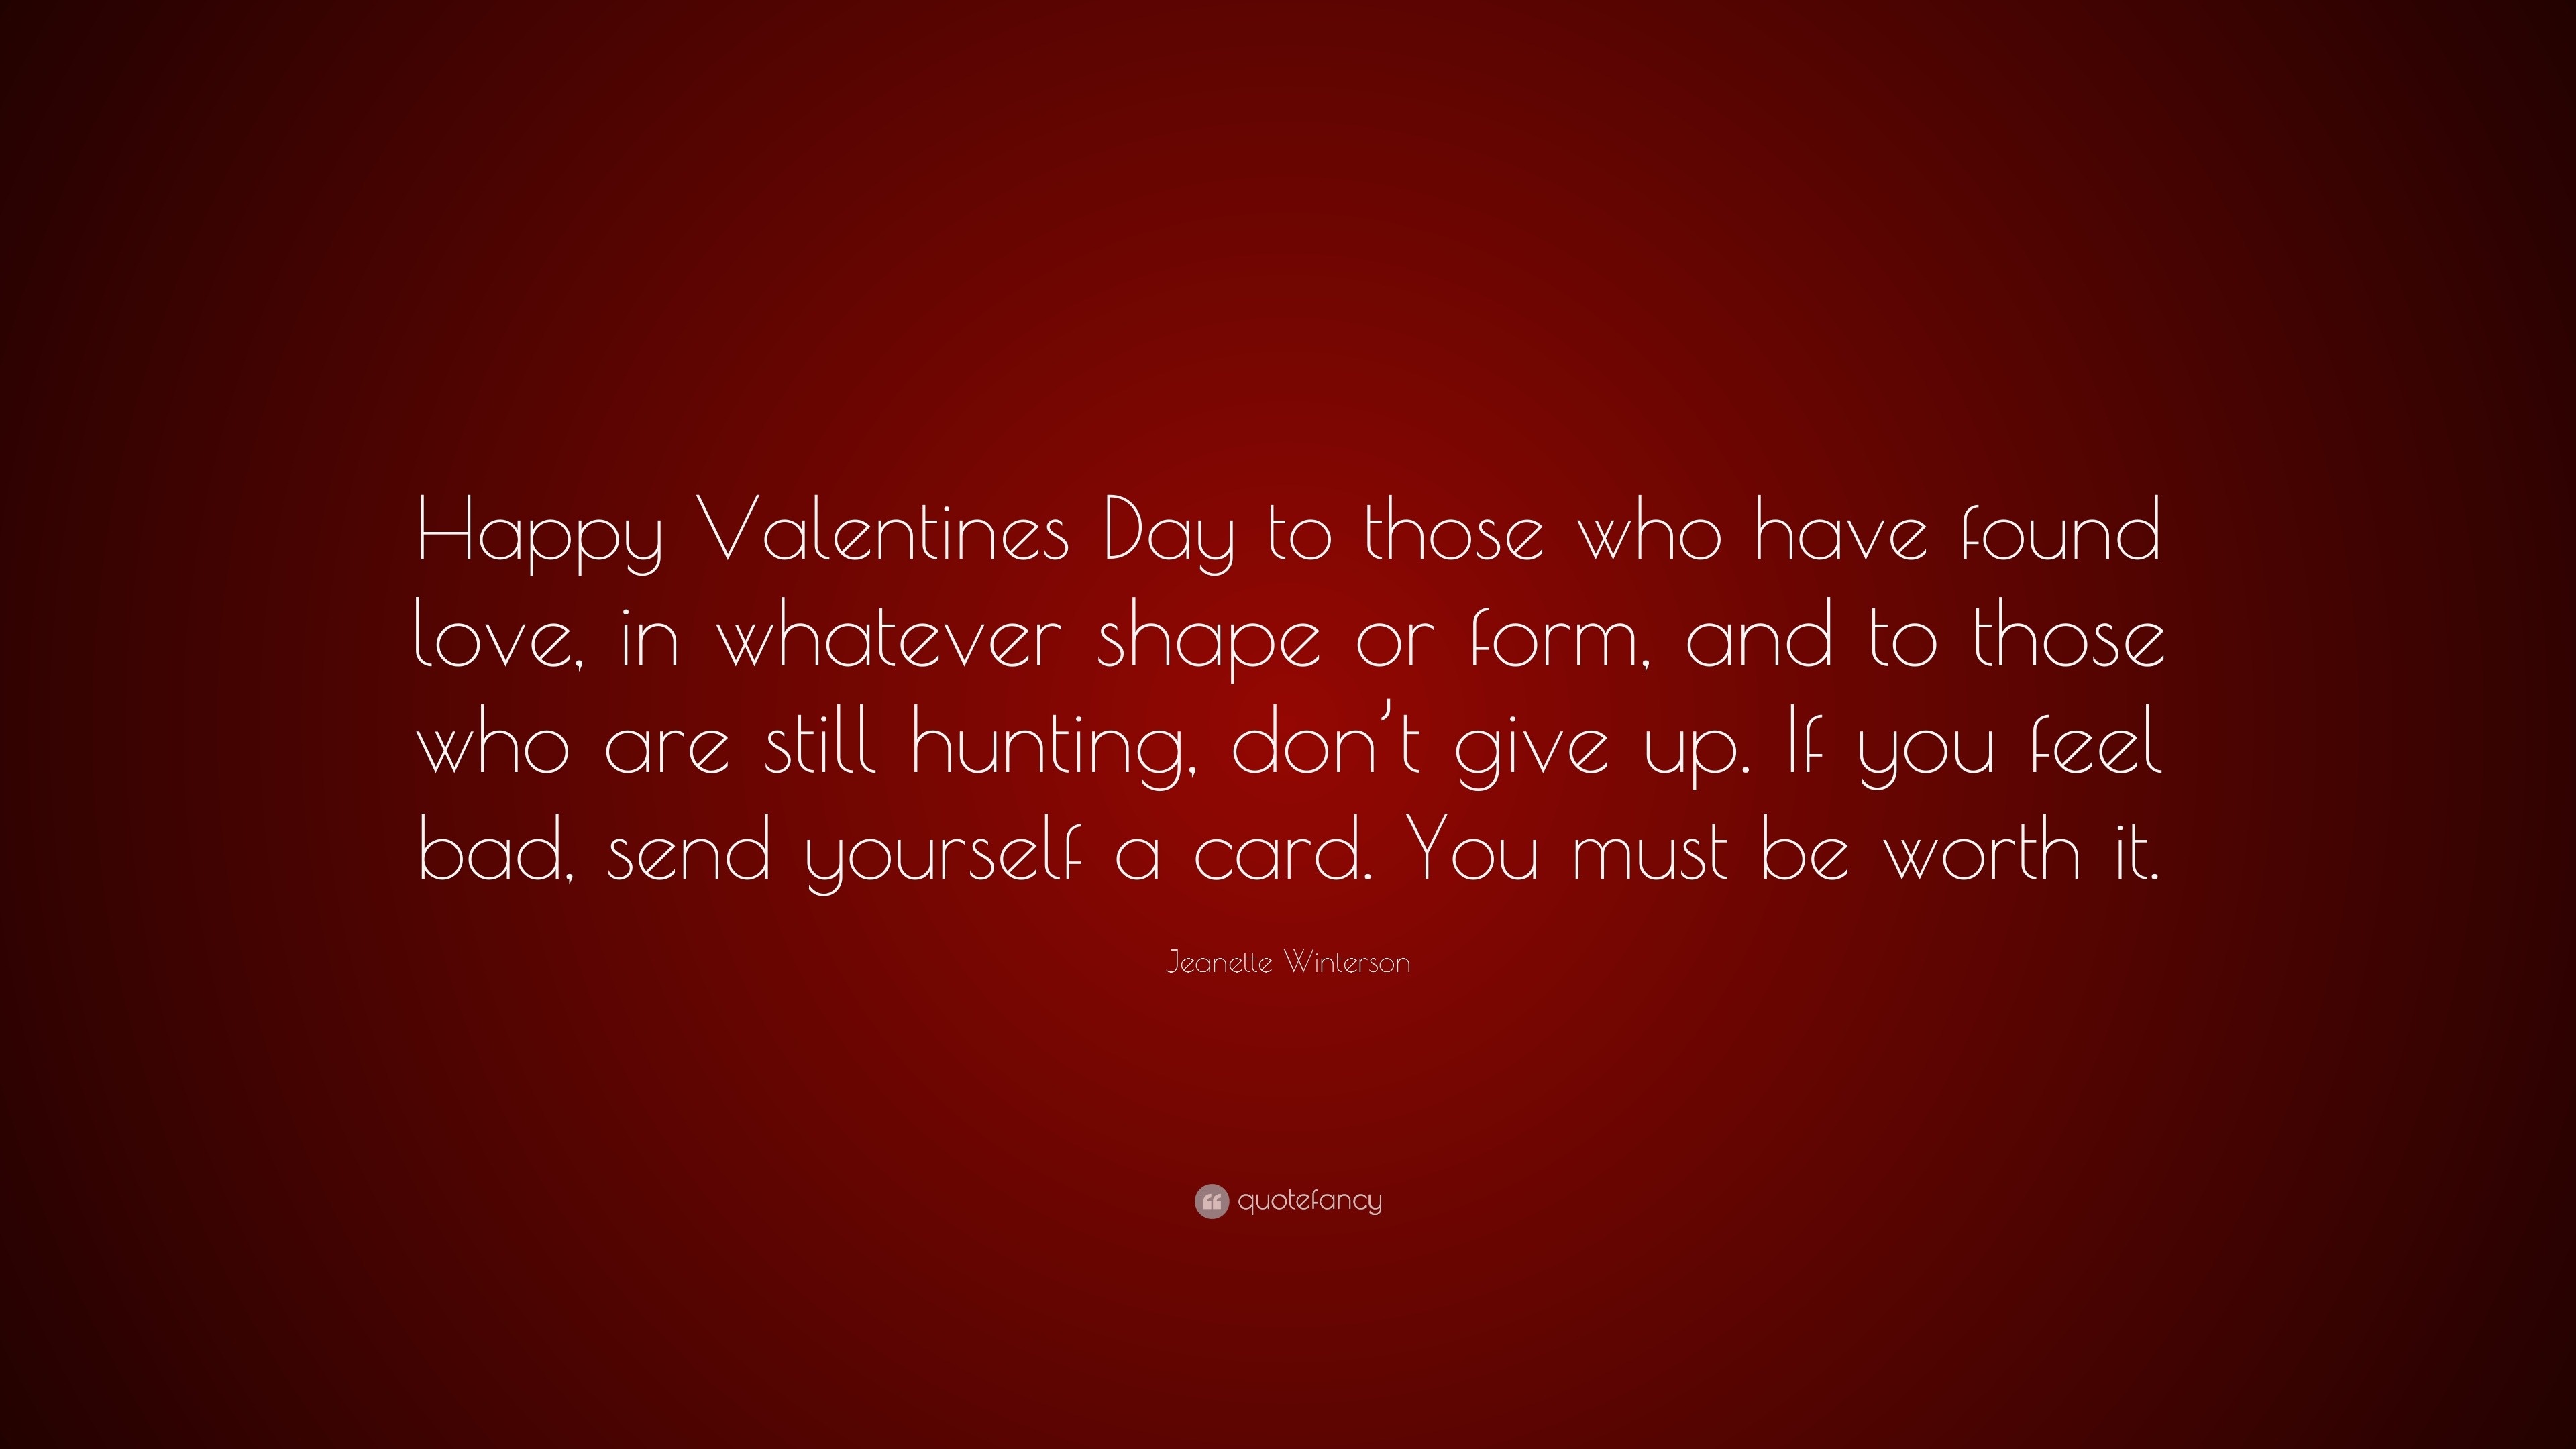 Valentine s Day Quotes “Happy Valentines Day to those who have found love in